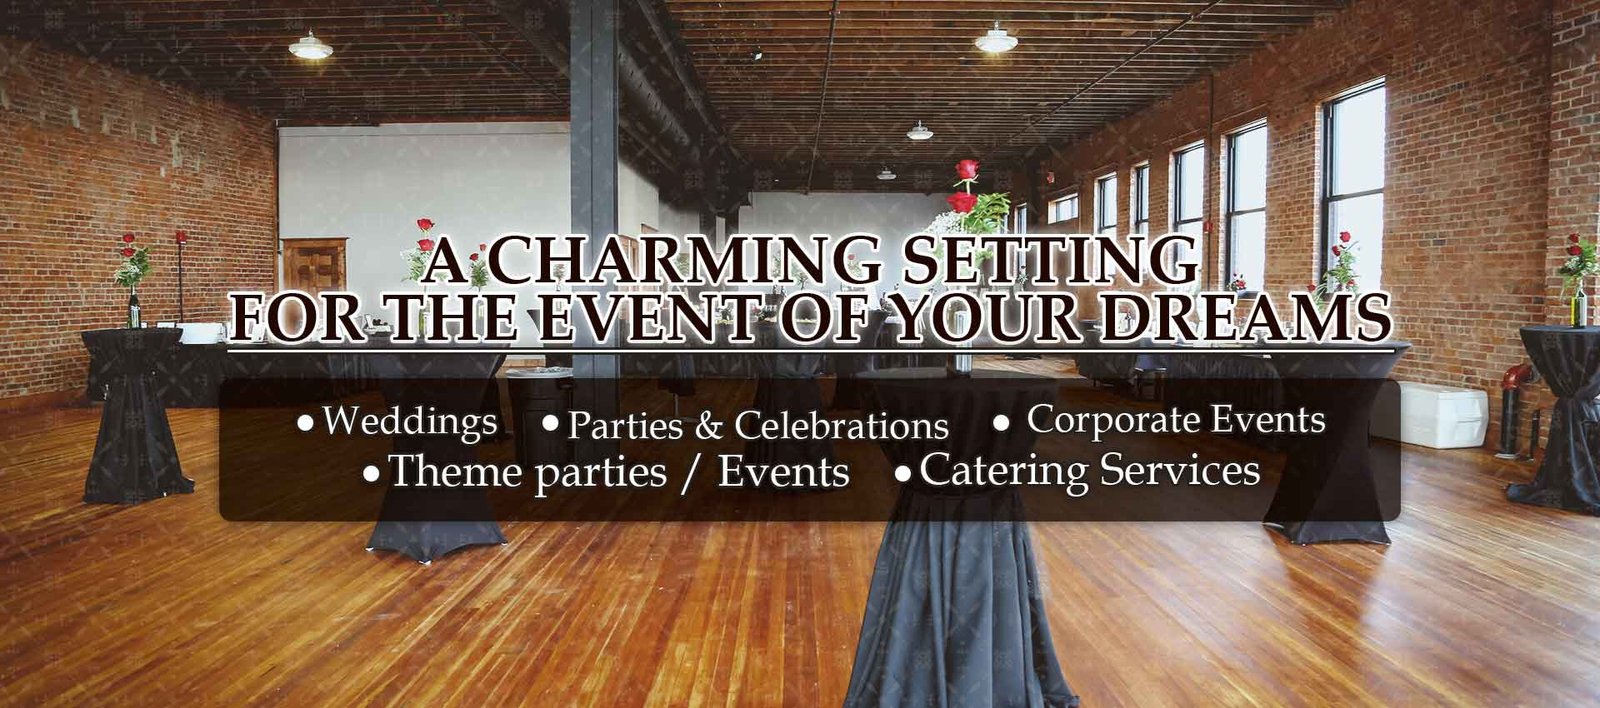 Event Venues for Weddings in Beatrice